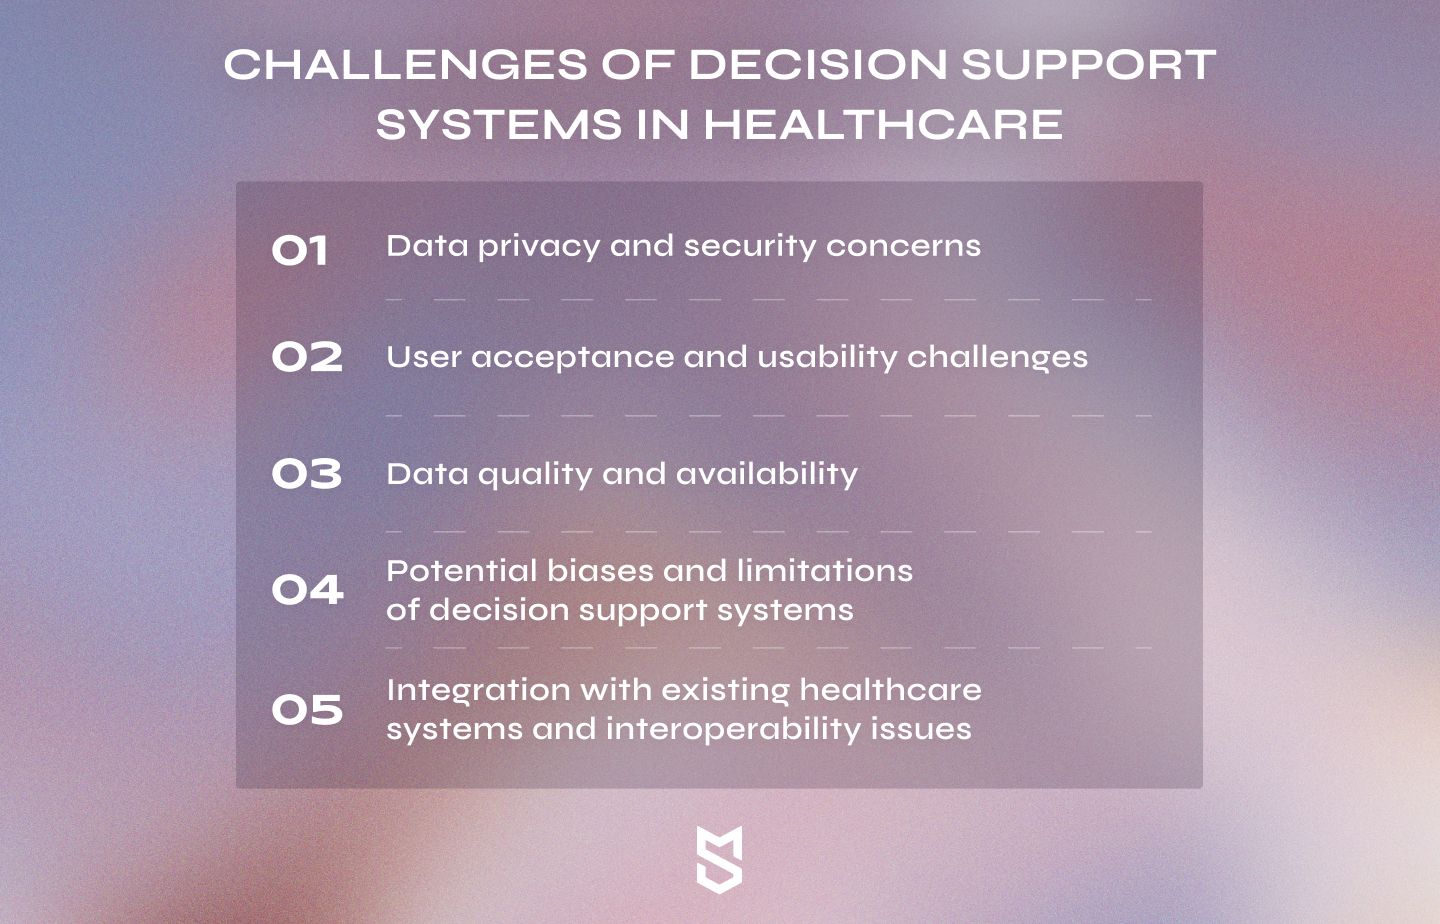 Challenges of decision support systems in healthcare